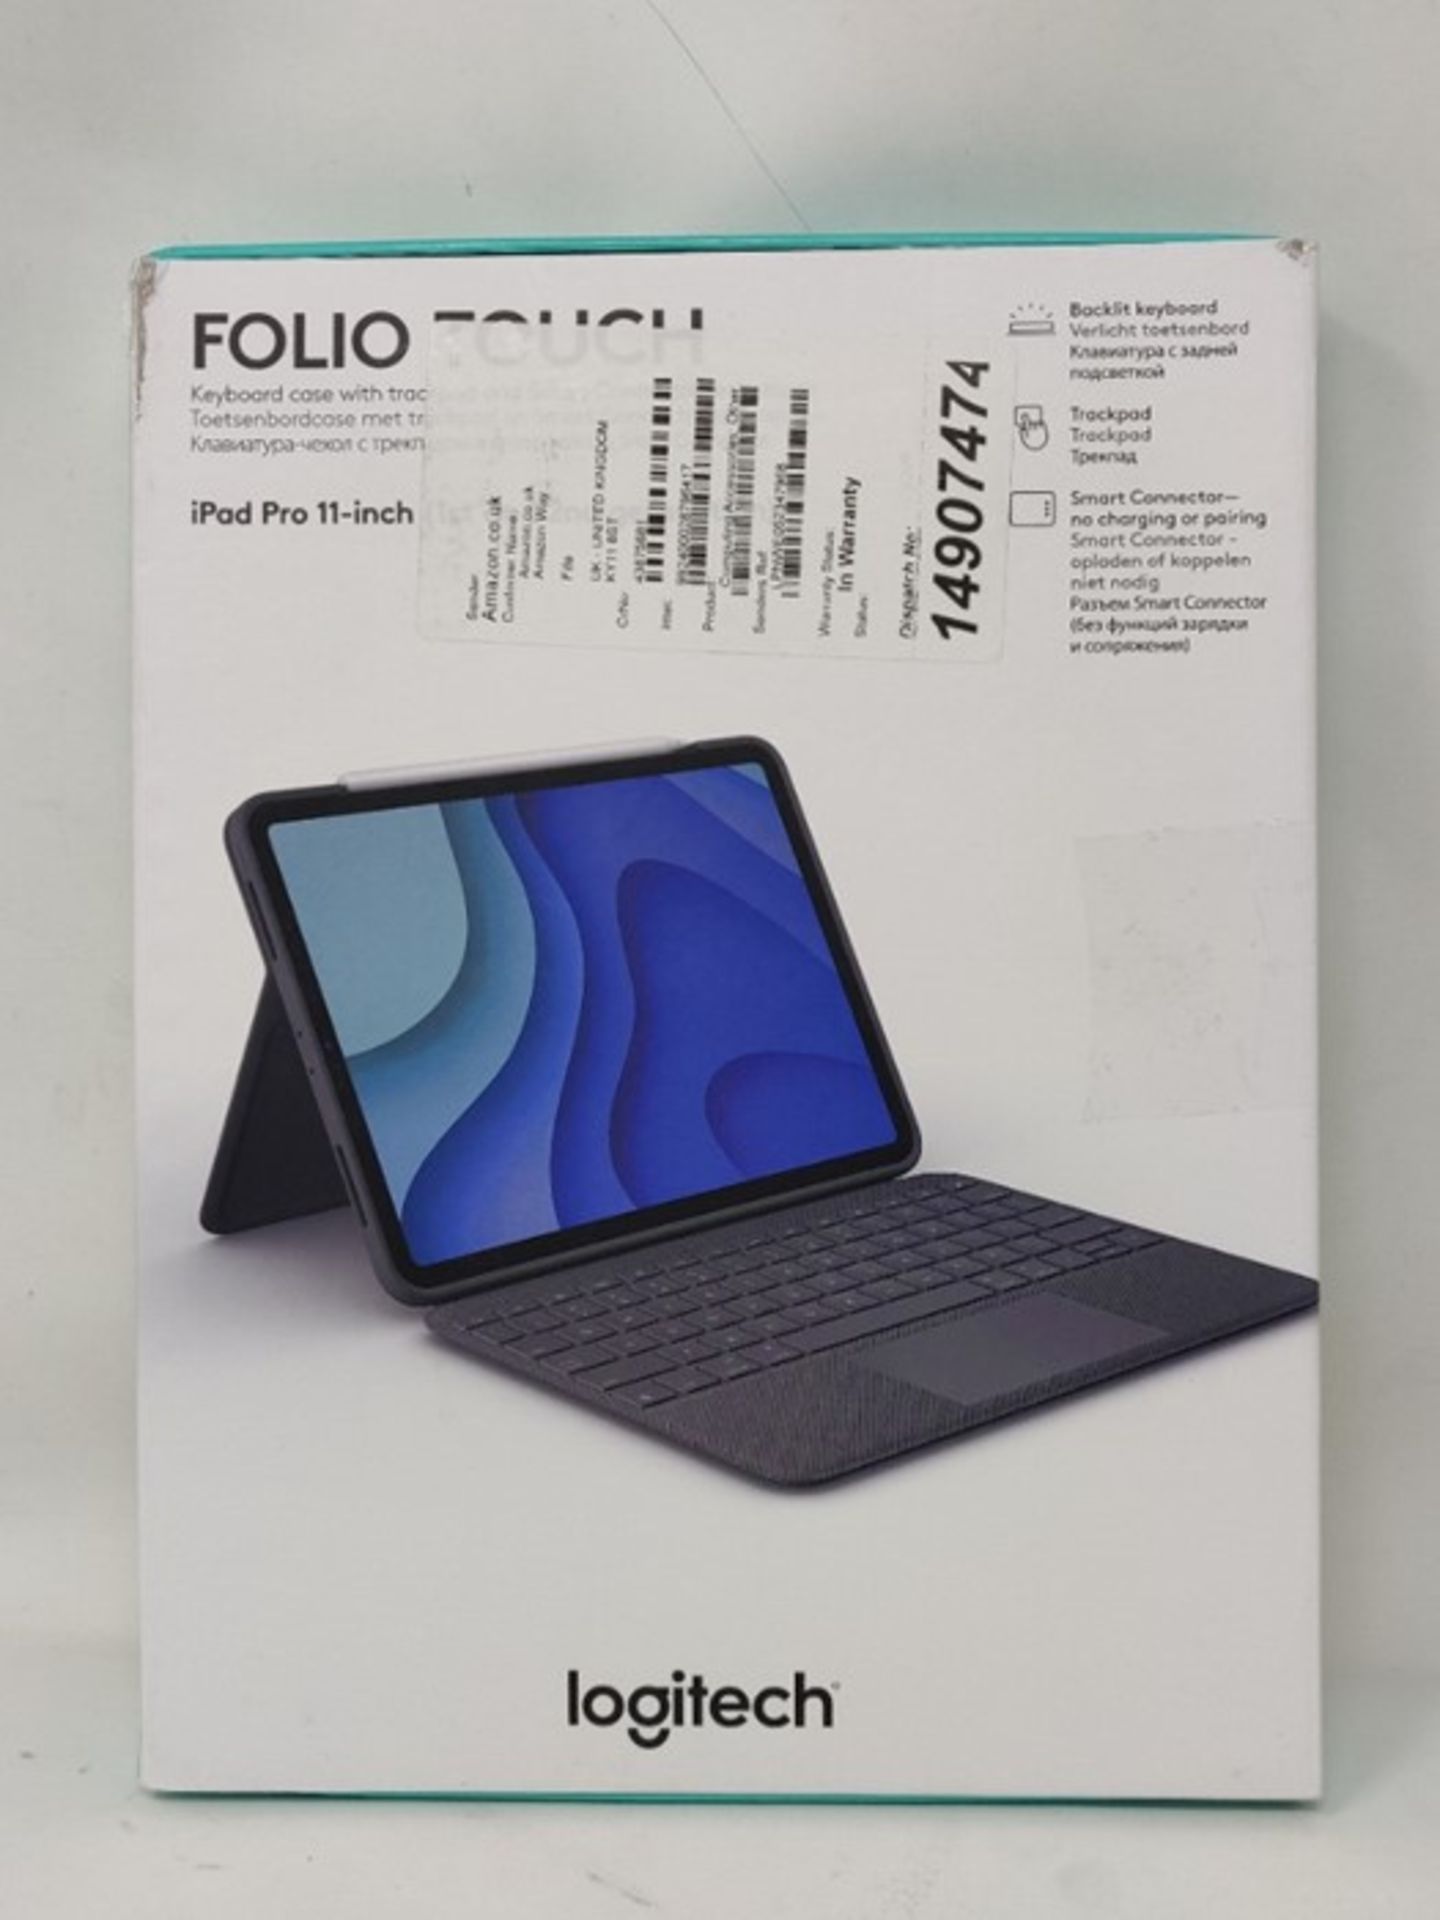 RRP £129.00 Logitech Folio Touch iPad Keyboard Case with Trackpad and Smart Connector for iPad Pro - Image 2 of 3